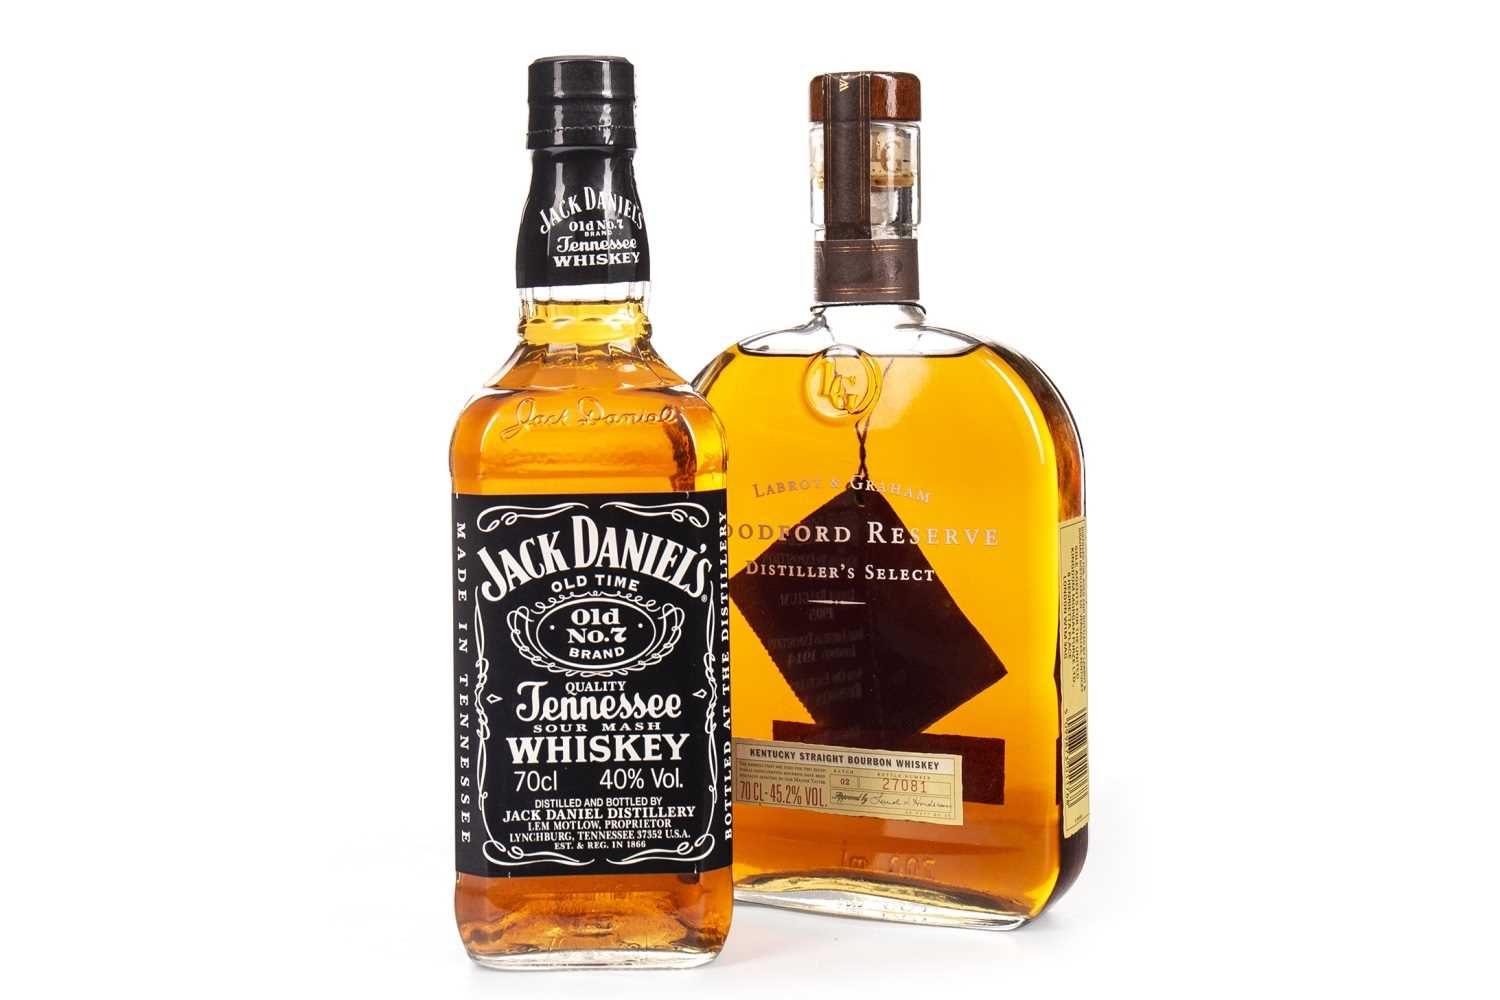 Lot 409 - WOODFORD RESERVE AND JACK DANIEL'S OLD NO. 7